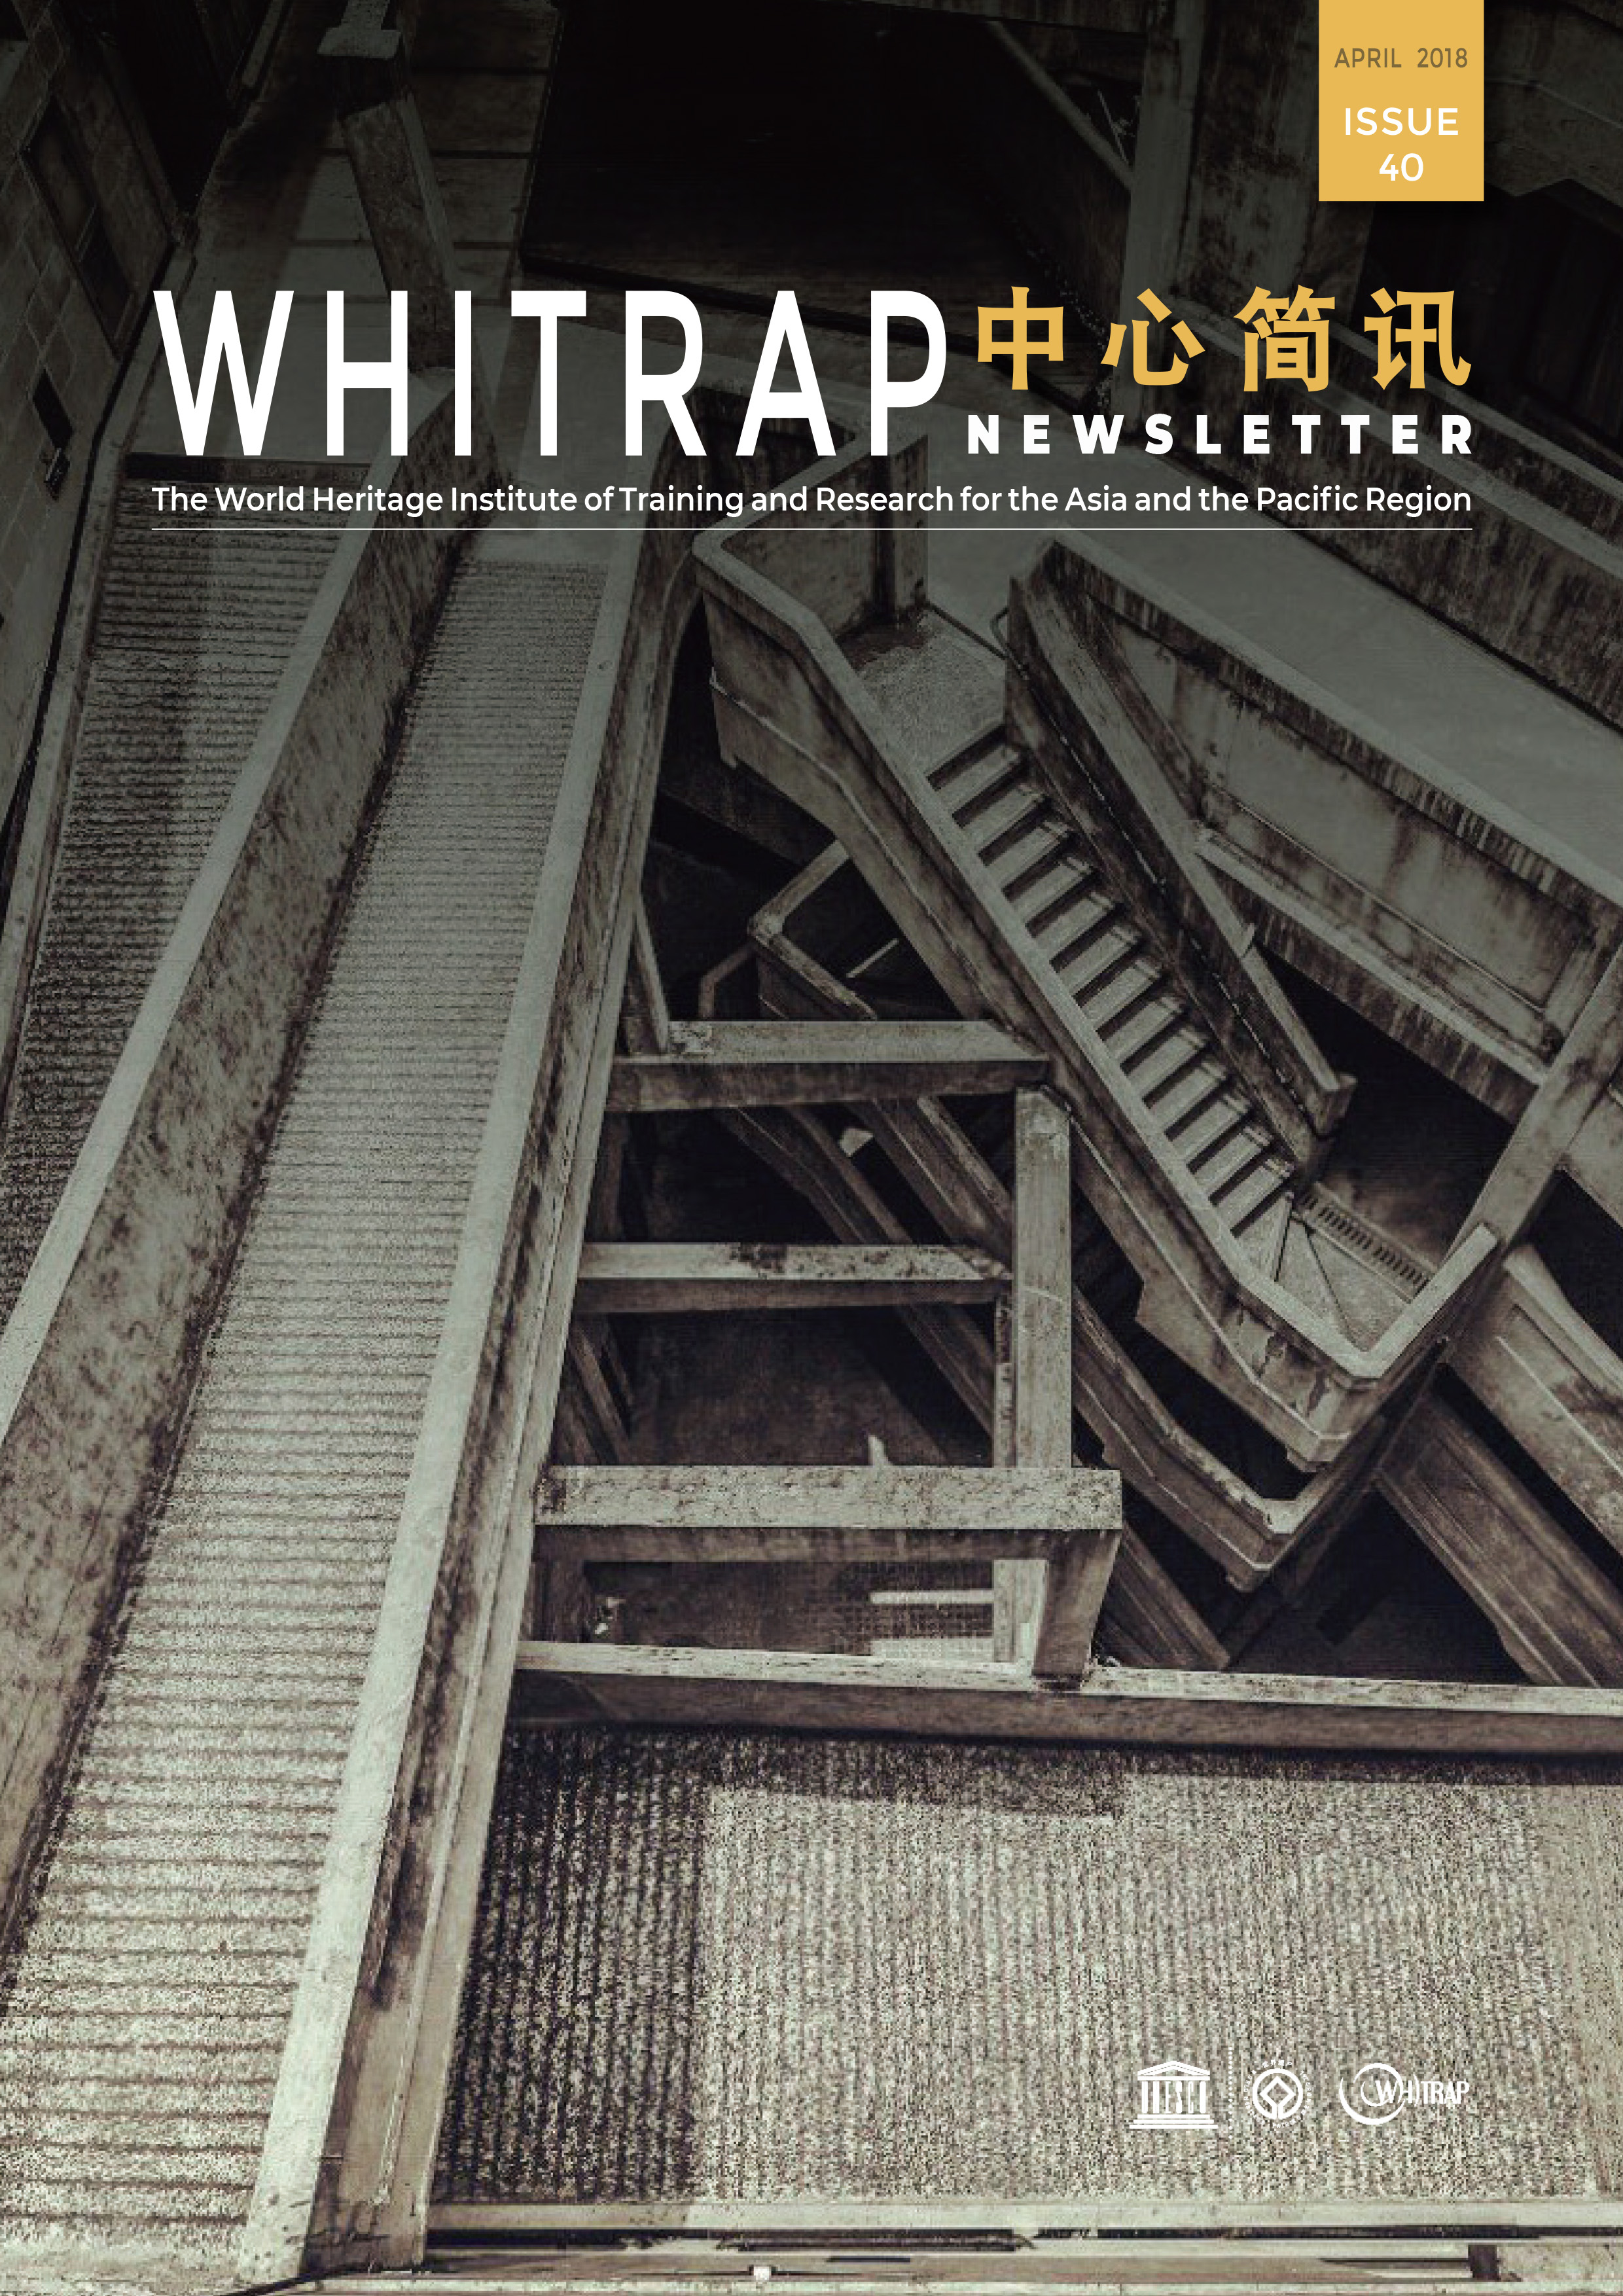 WHITRAP Newsletter (Issue 40)